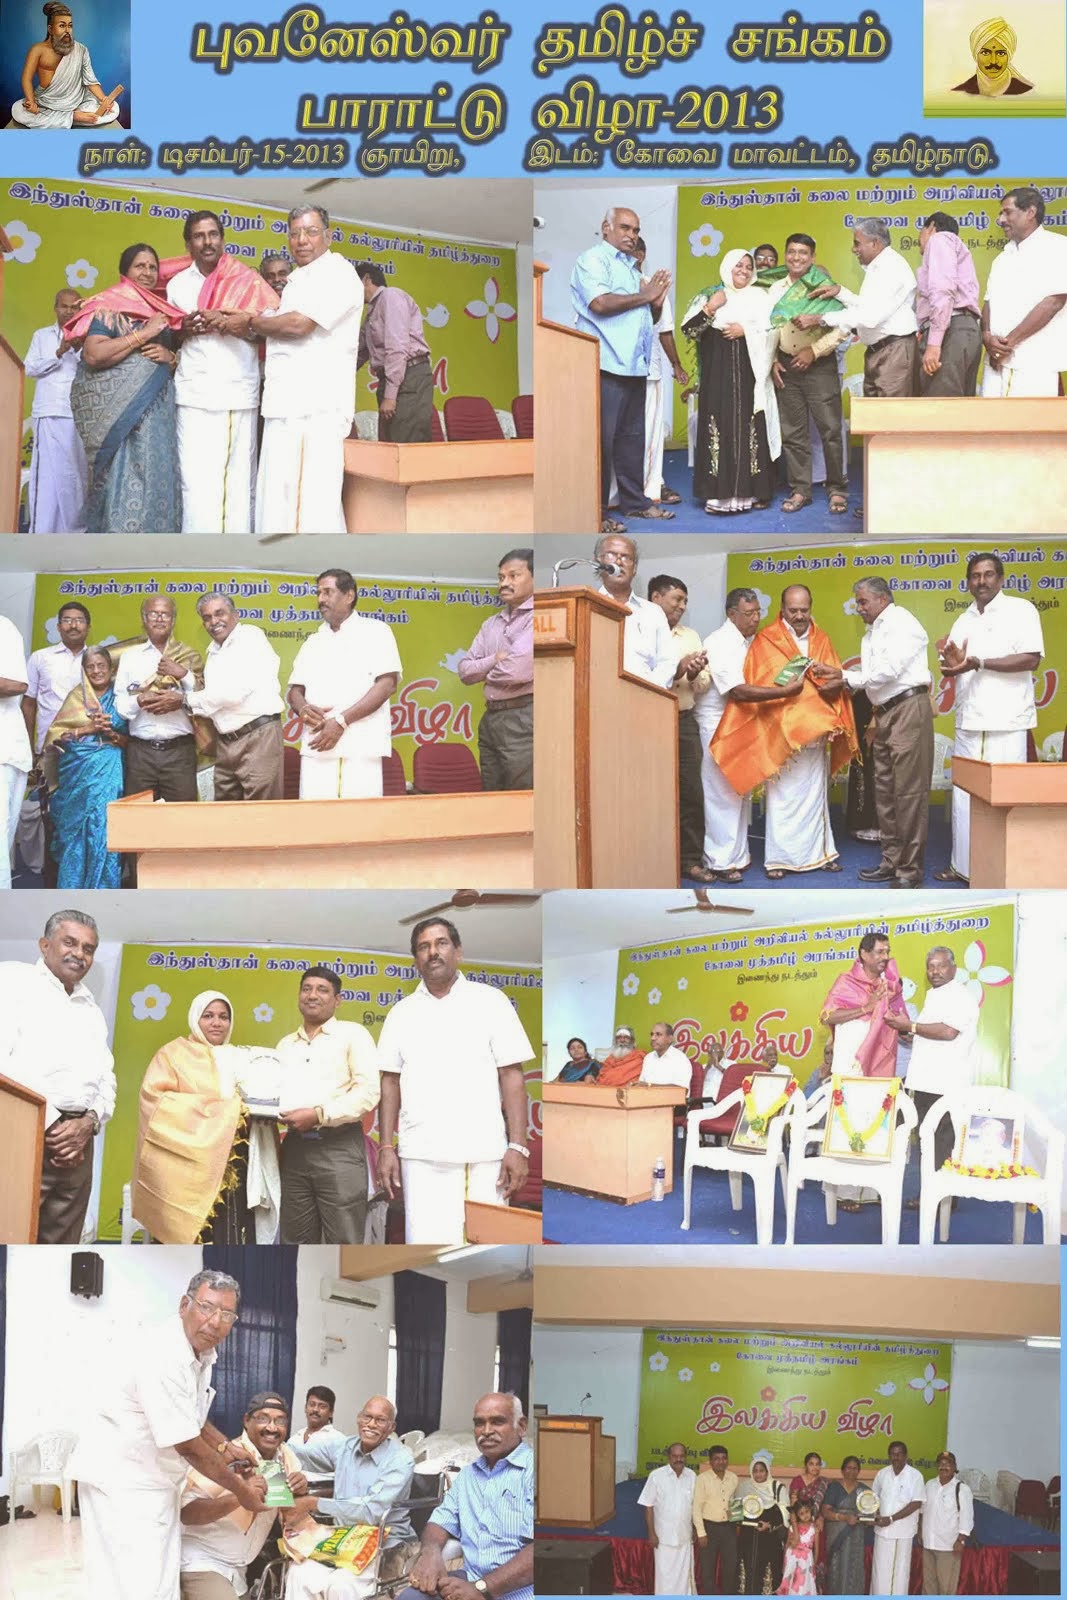 BTS : Covai - Tamil Welcome Function, Date : 15-Dec-2013 ( Sunday )